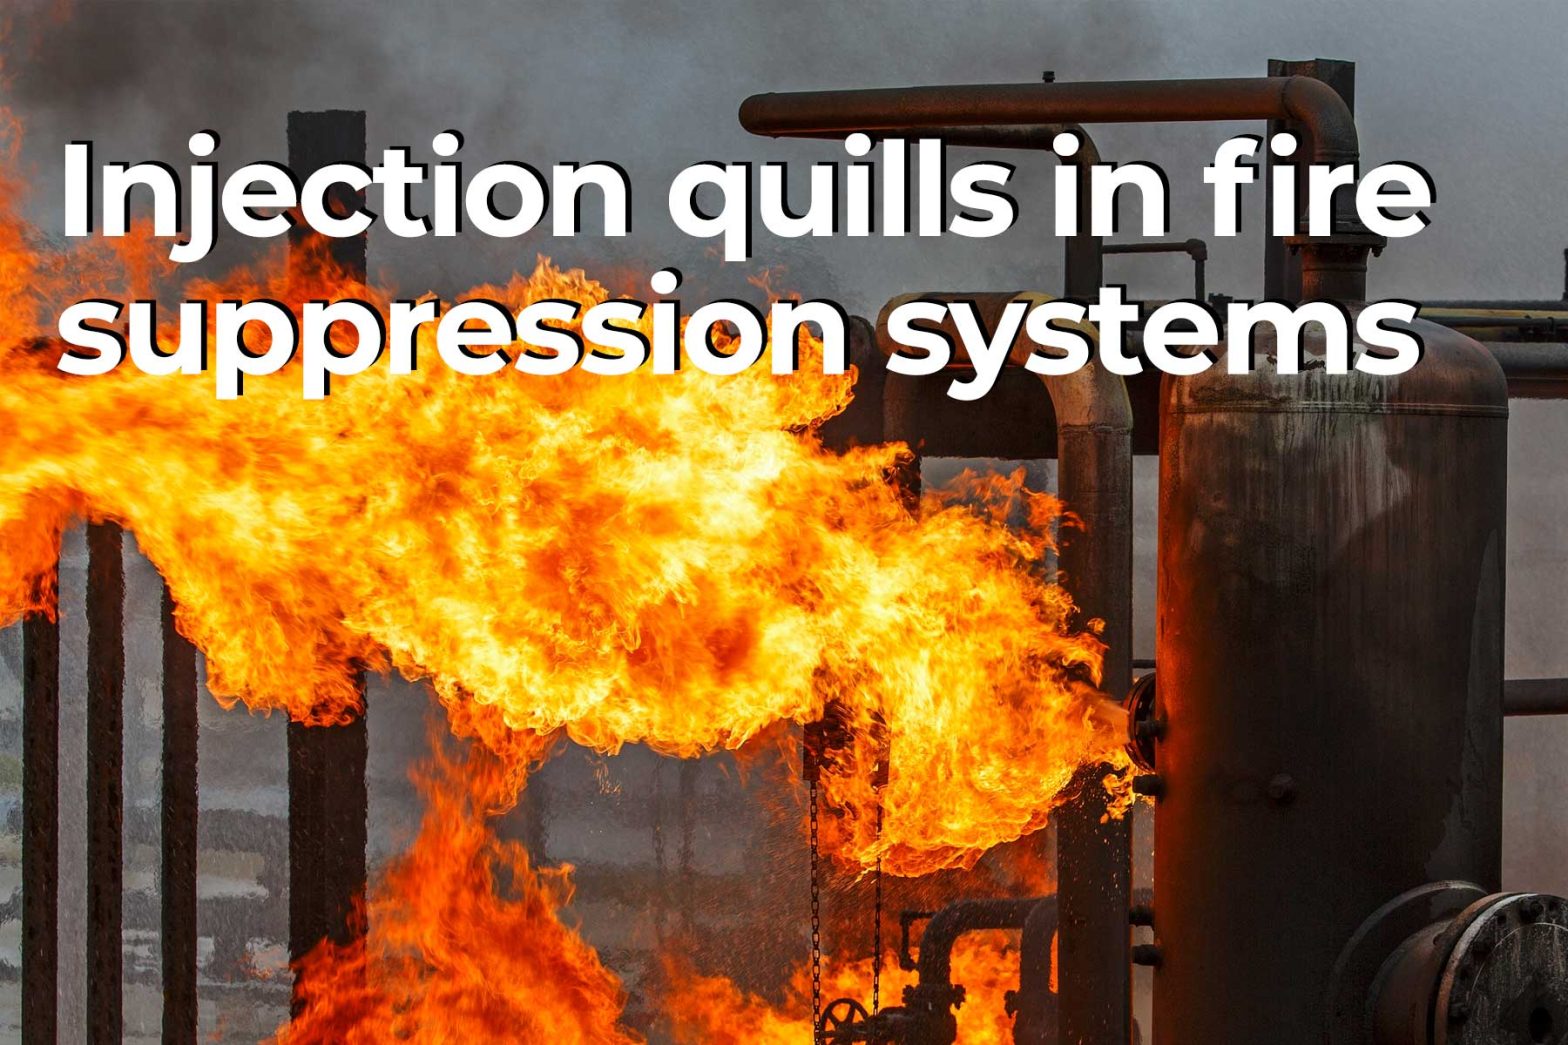 Injection quills in fire suppression systems